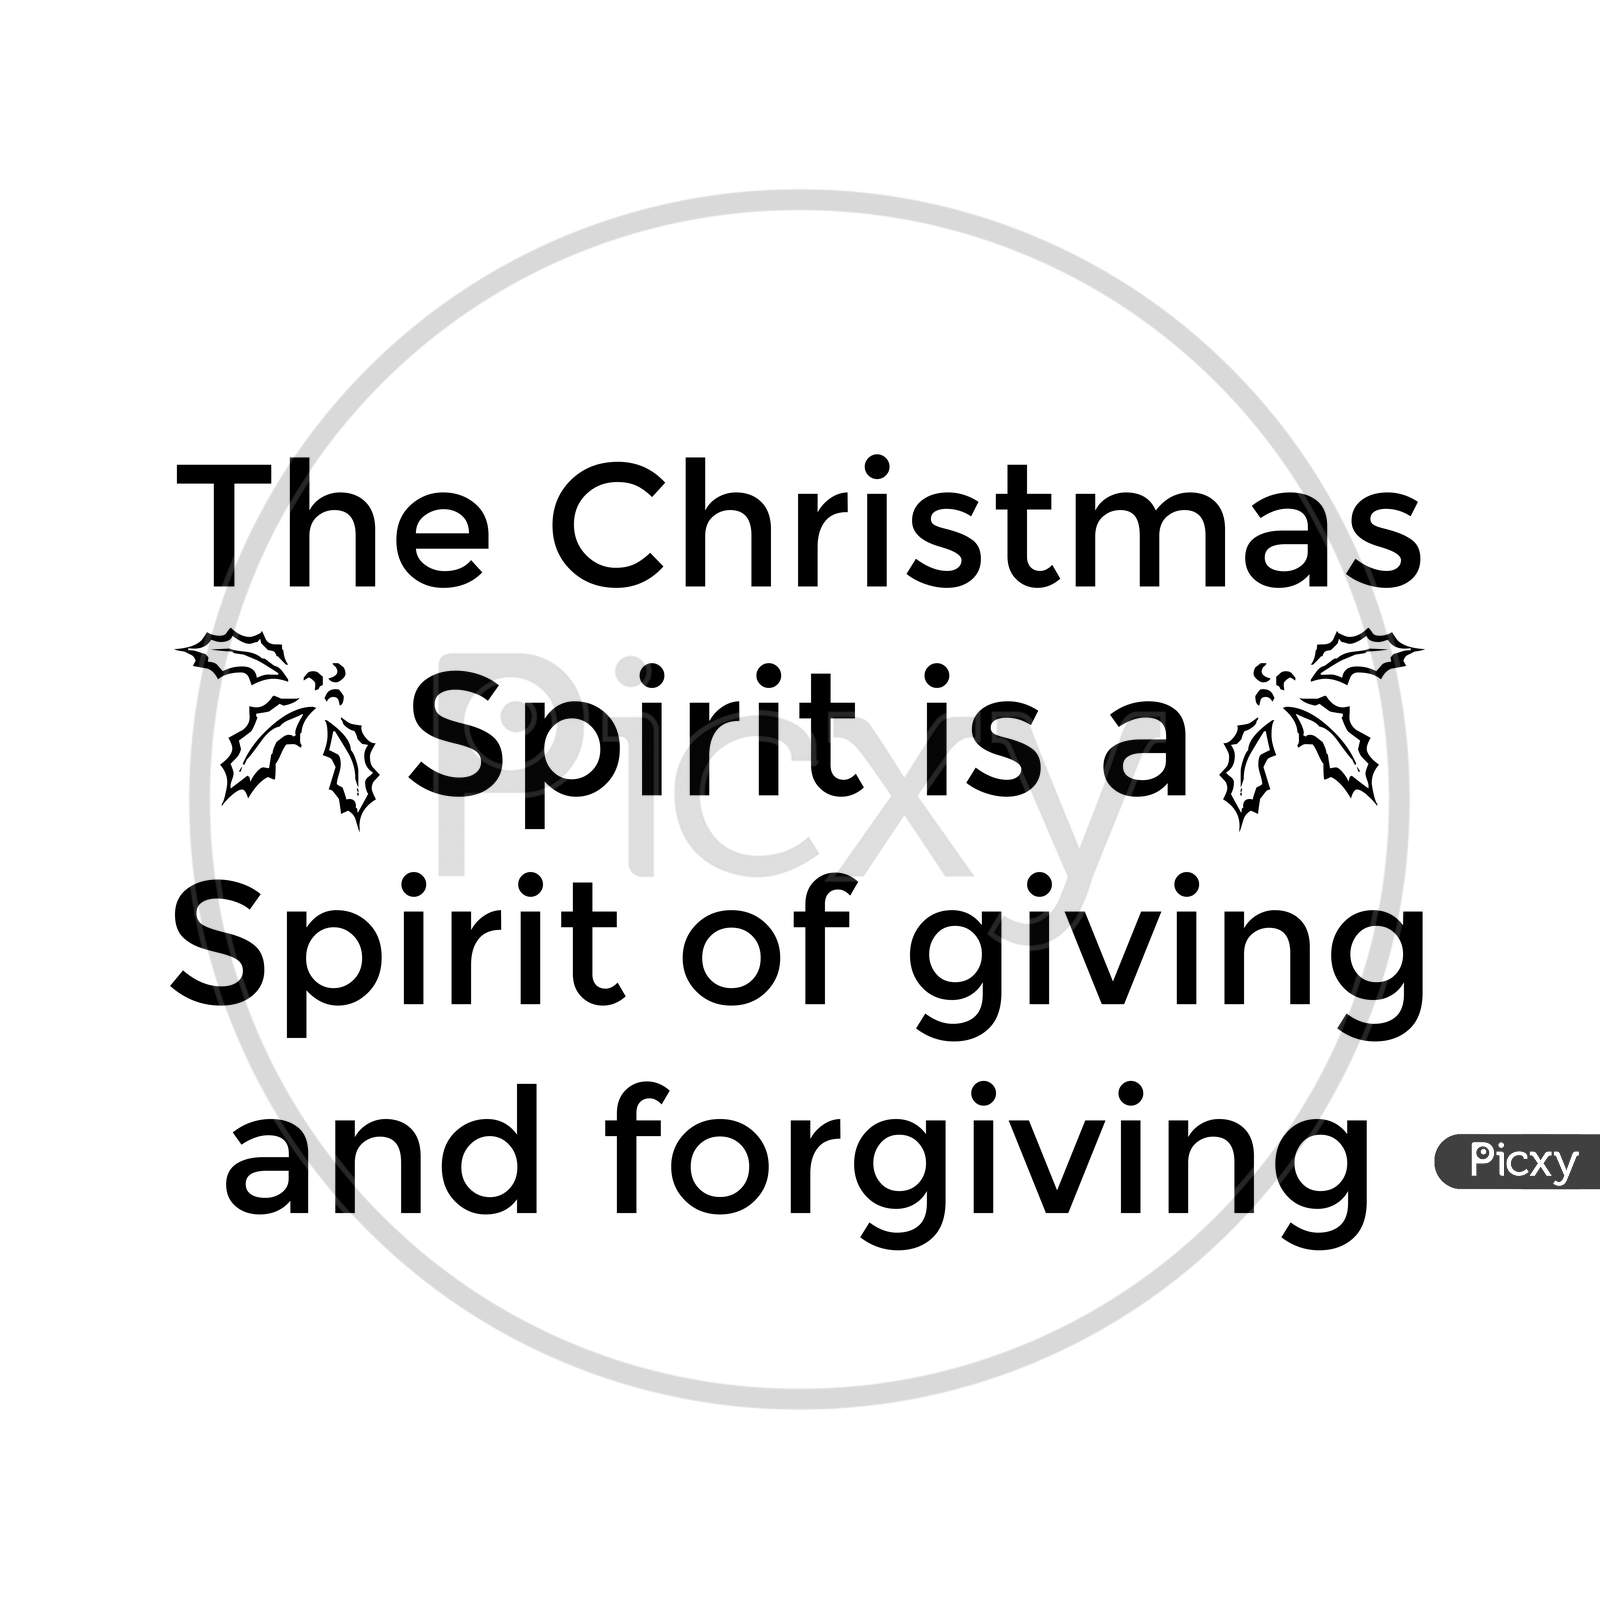 The Christmas Spirit is a Spirit of giving and forgiving